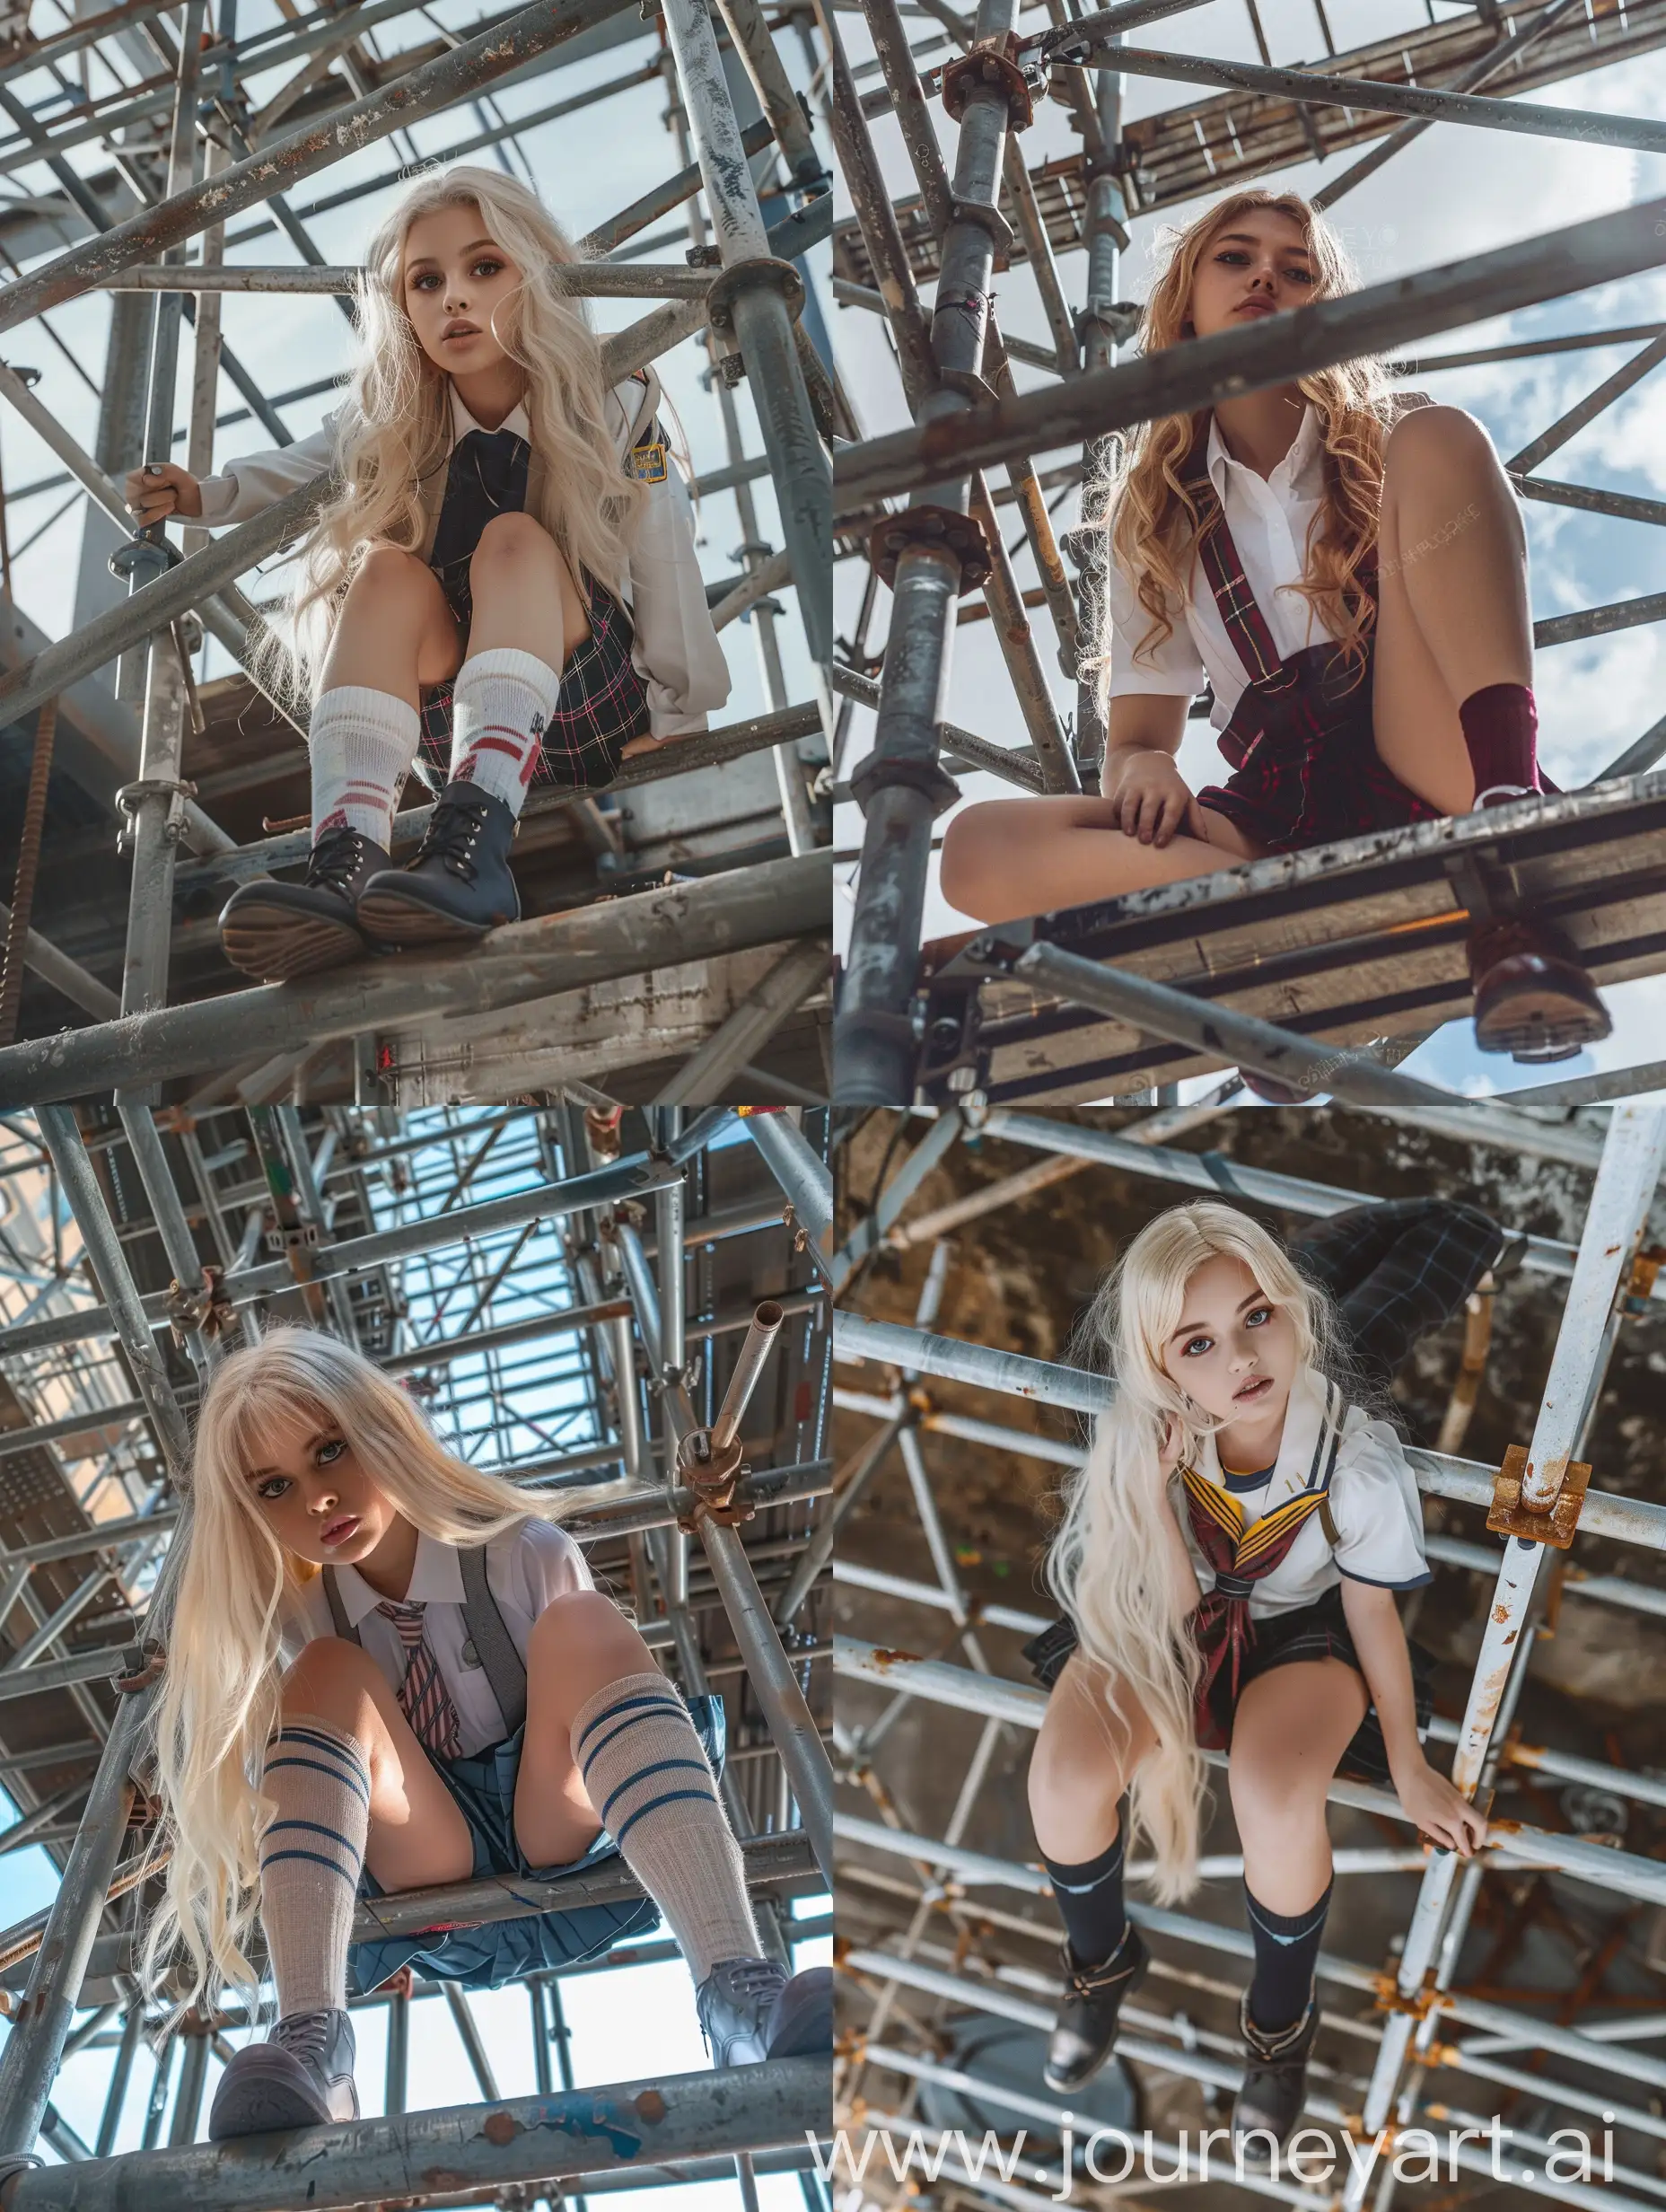 1 girl, long blond hair, 18 years old, influencer, beauty,   school uniform, makeup, down view, , down view, socks and boots, 4k, , is working on a steel scaffold under construction